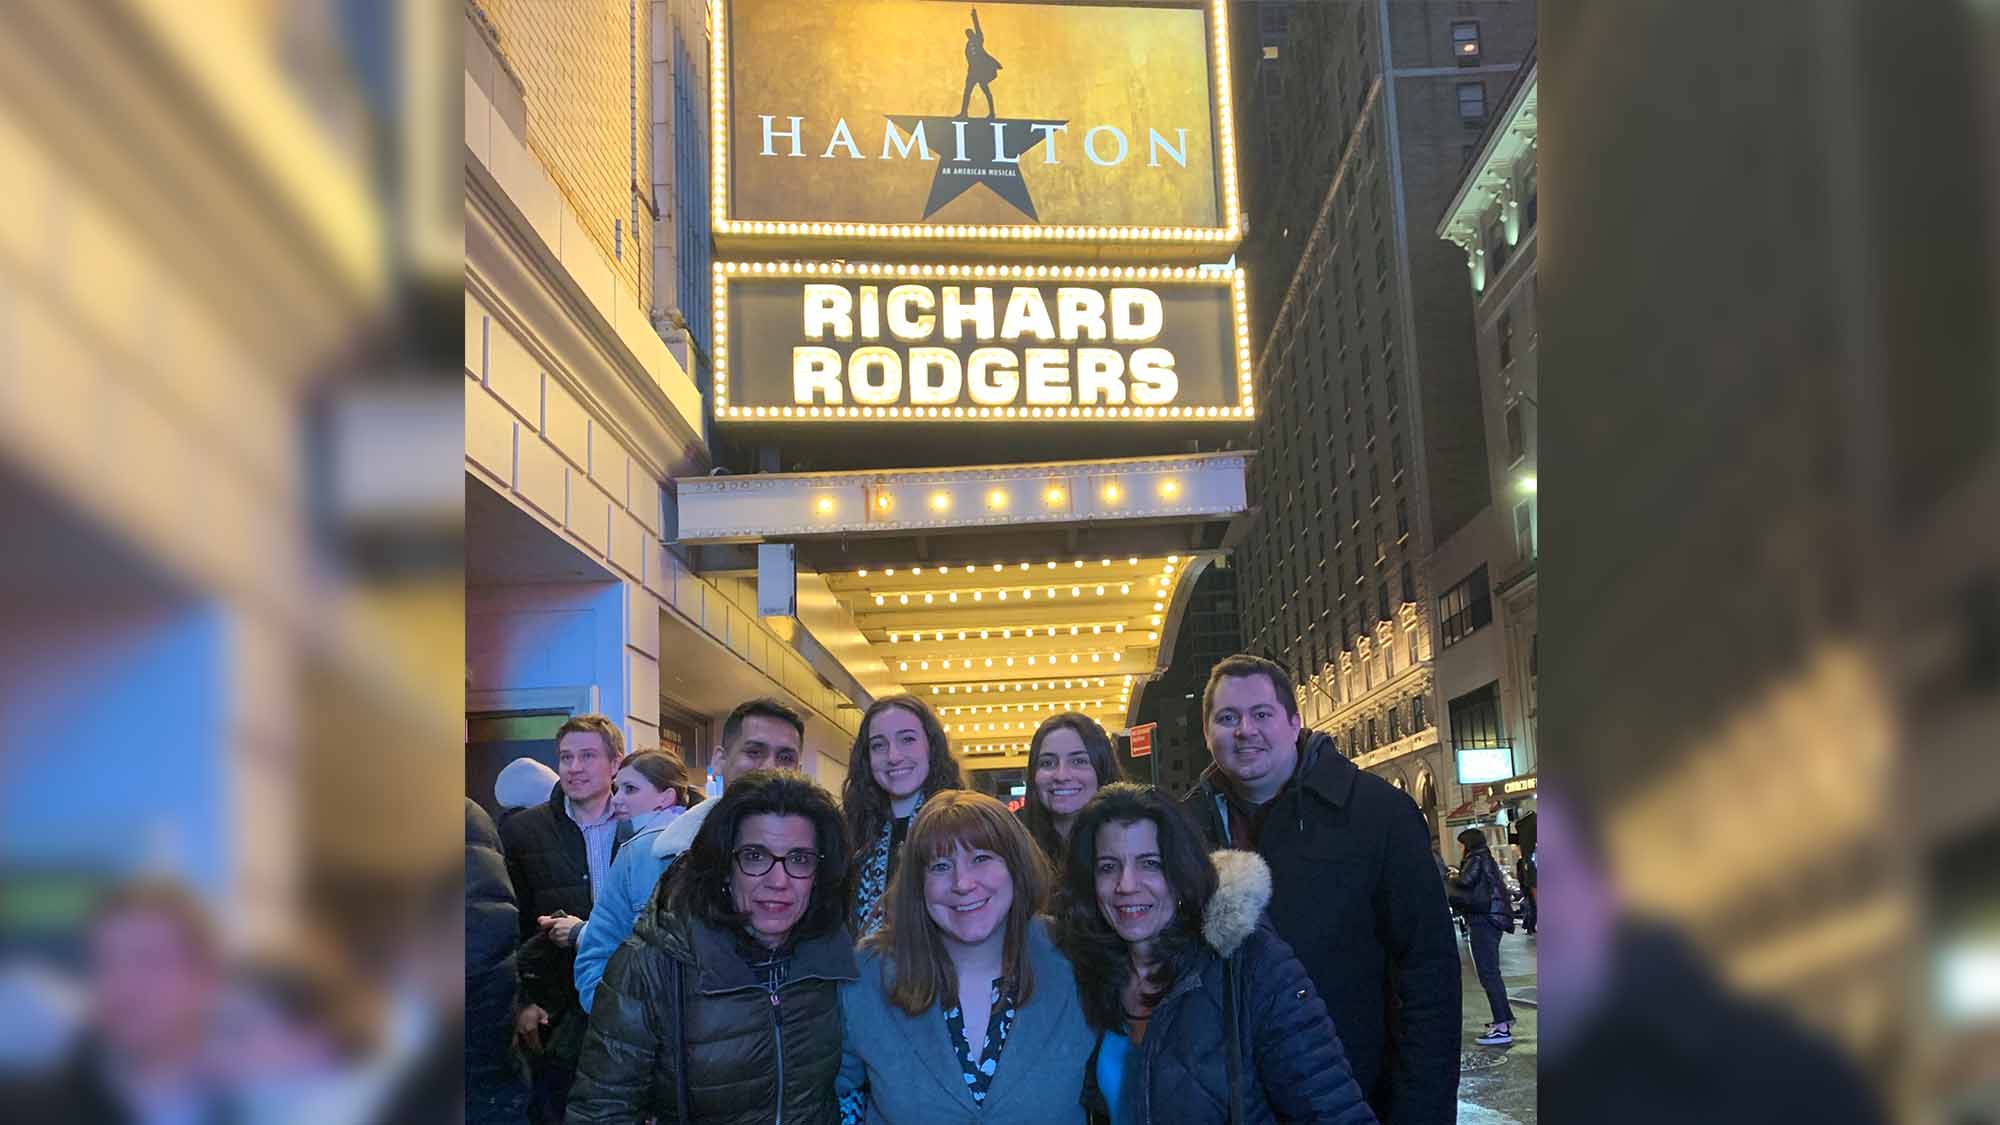 The Clyde Paul team at the Richard Rodgers Theatre posing with the Hamilton sign.